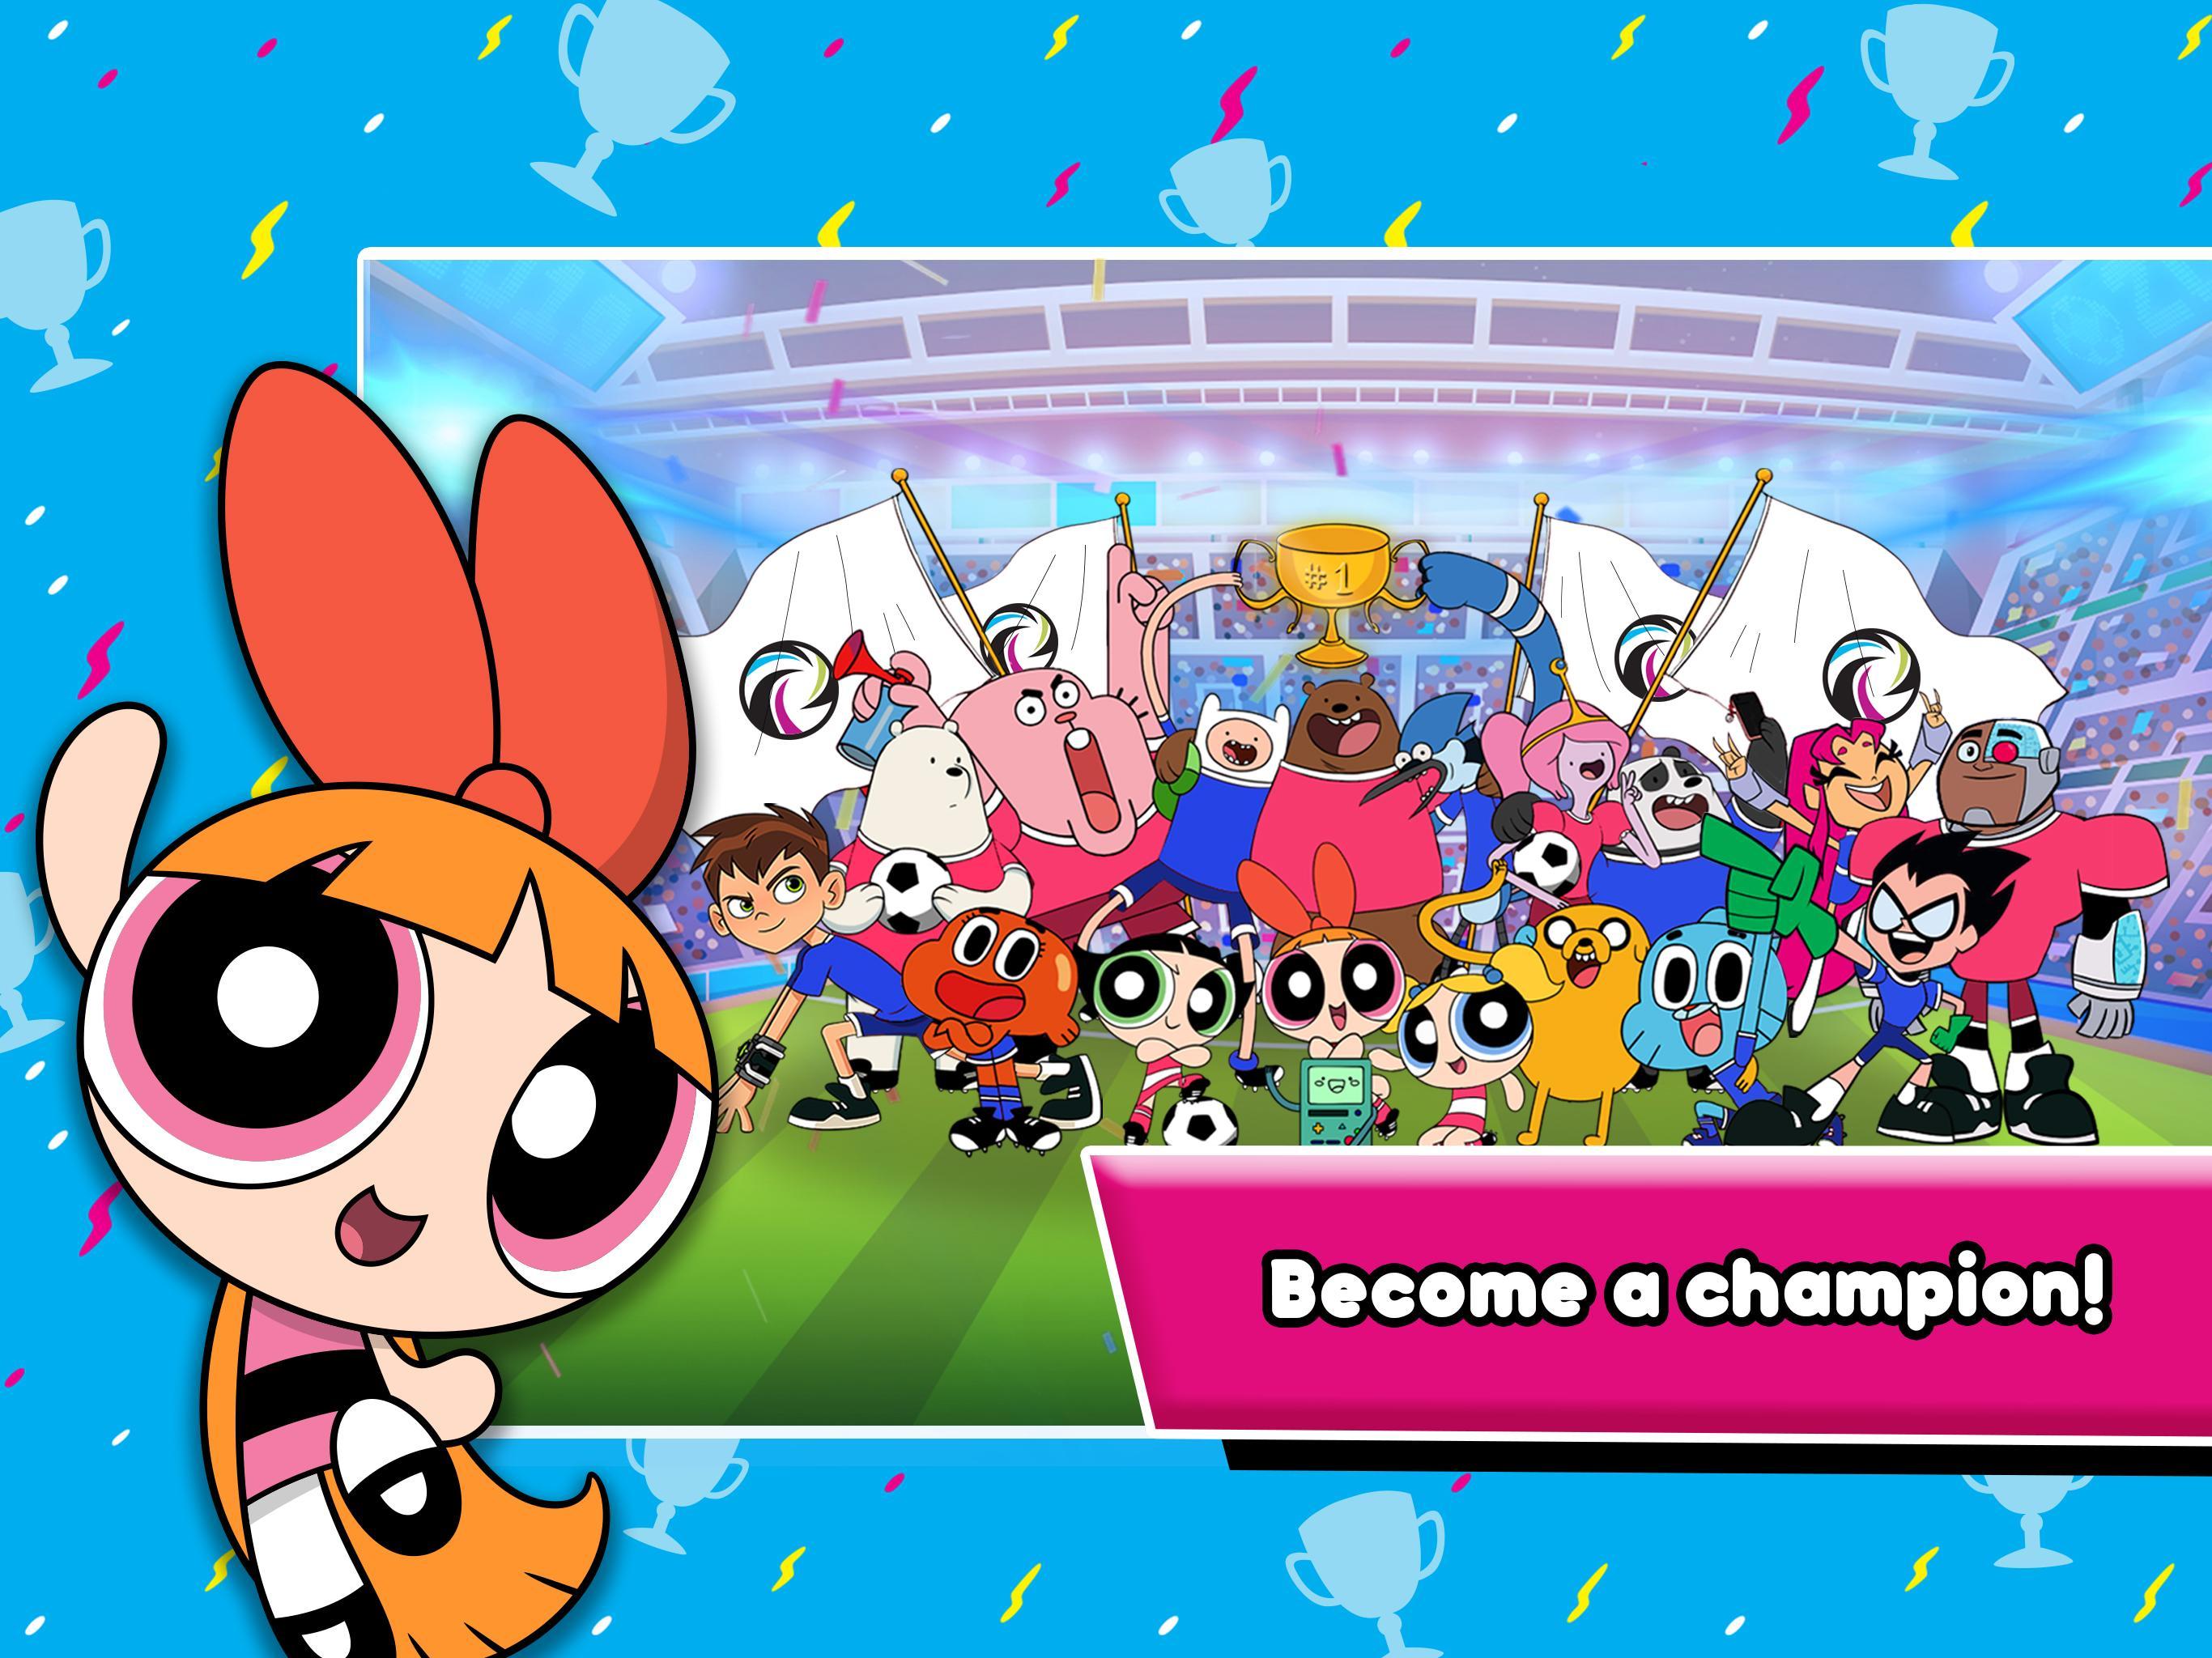 Toon Cup - Cartoon Network's Soccer Game for Android - APK ... - 